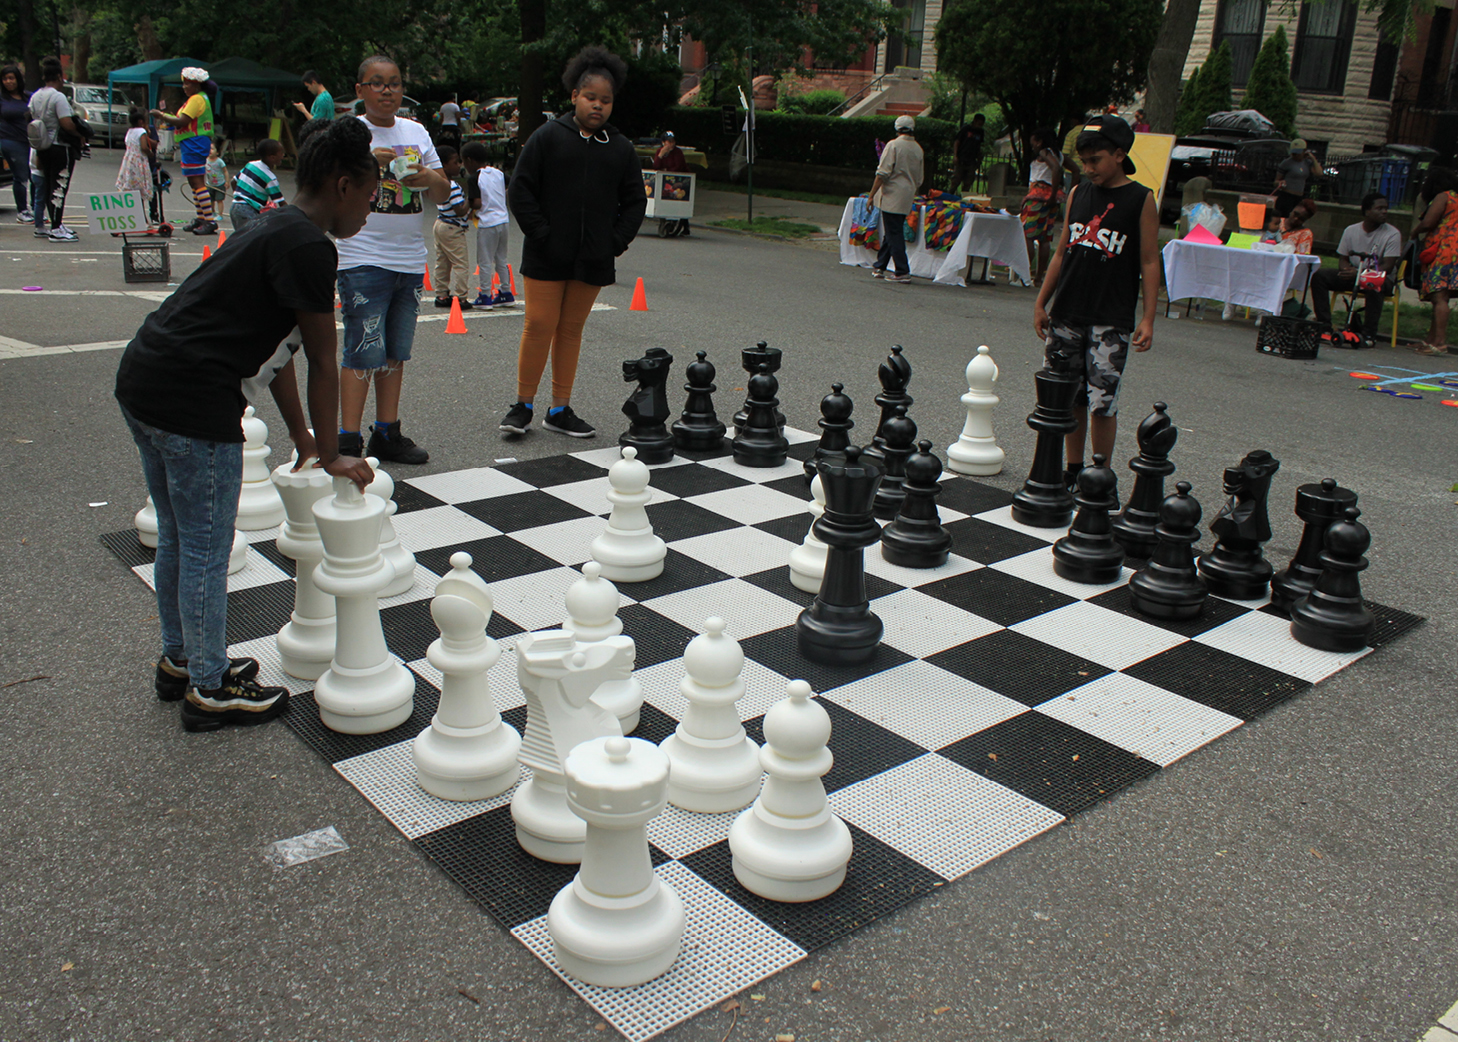 Giant outdoor chess set